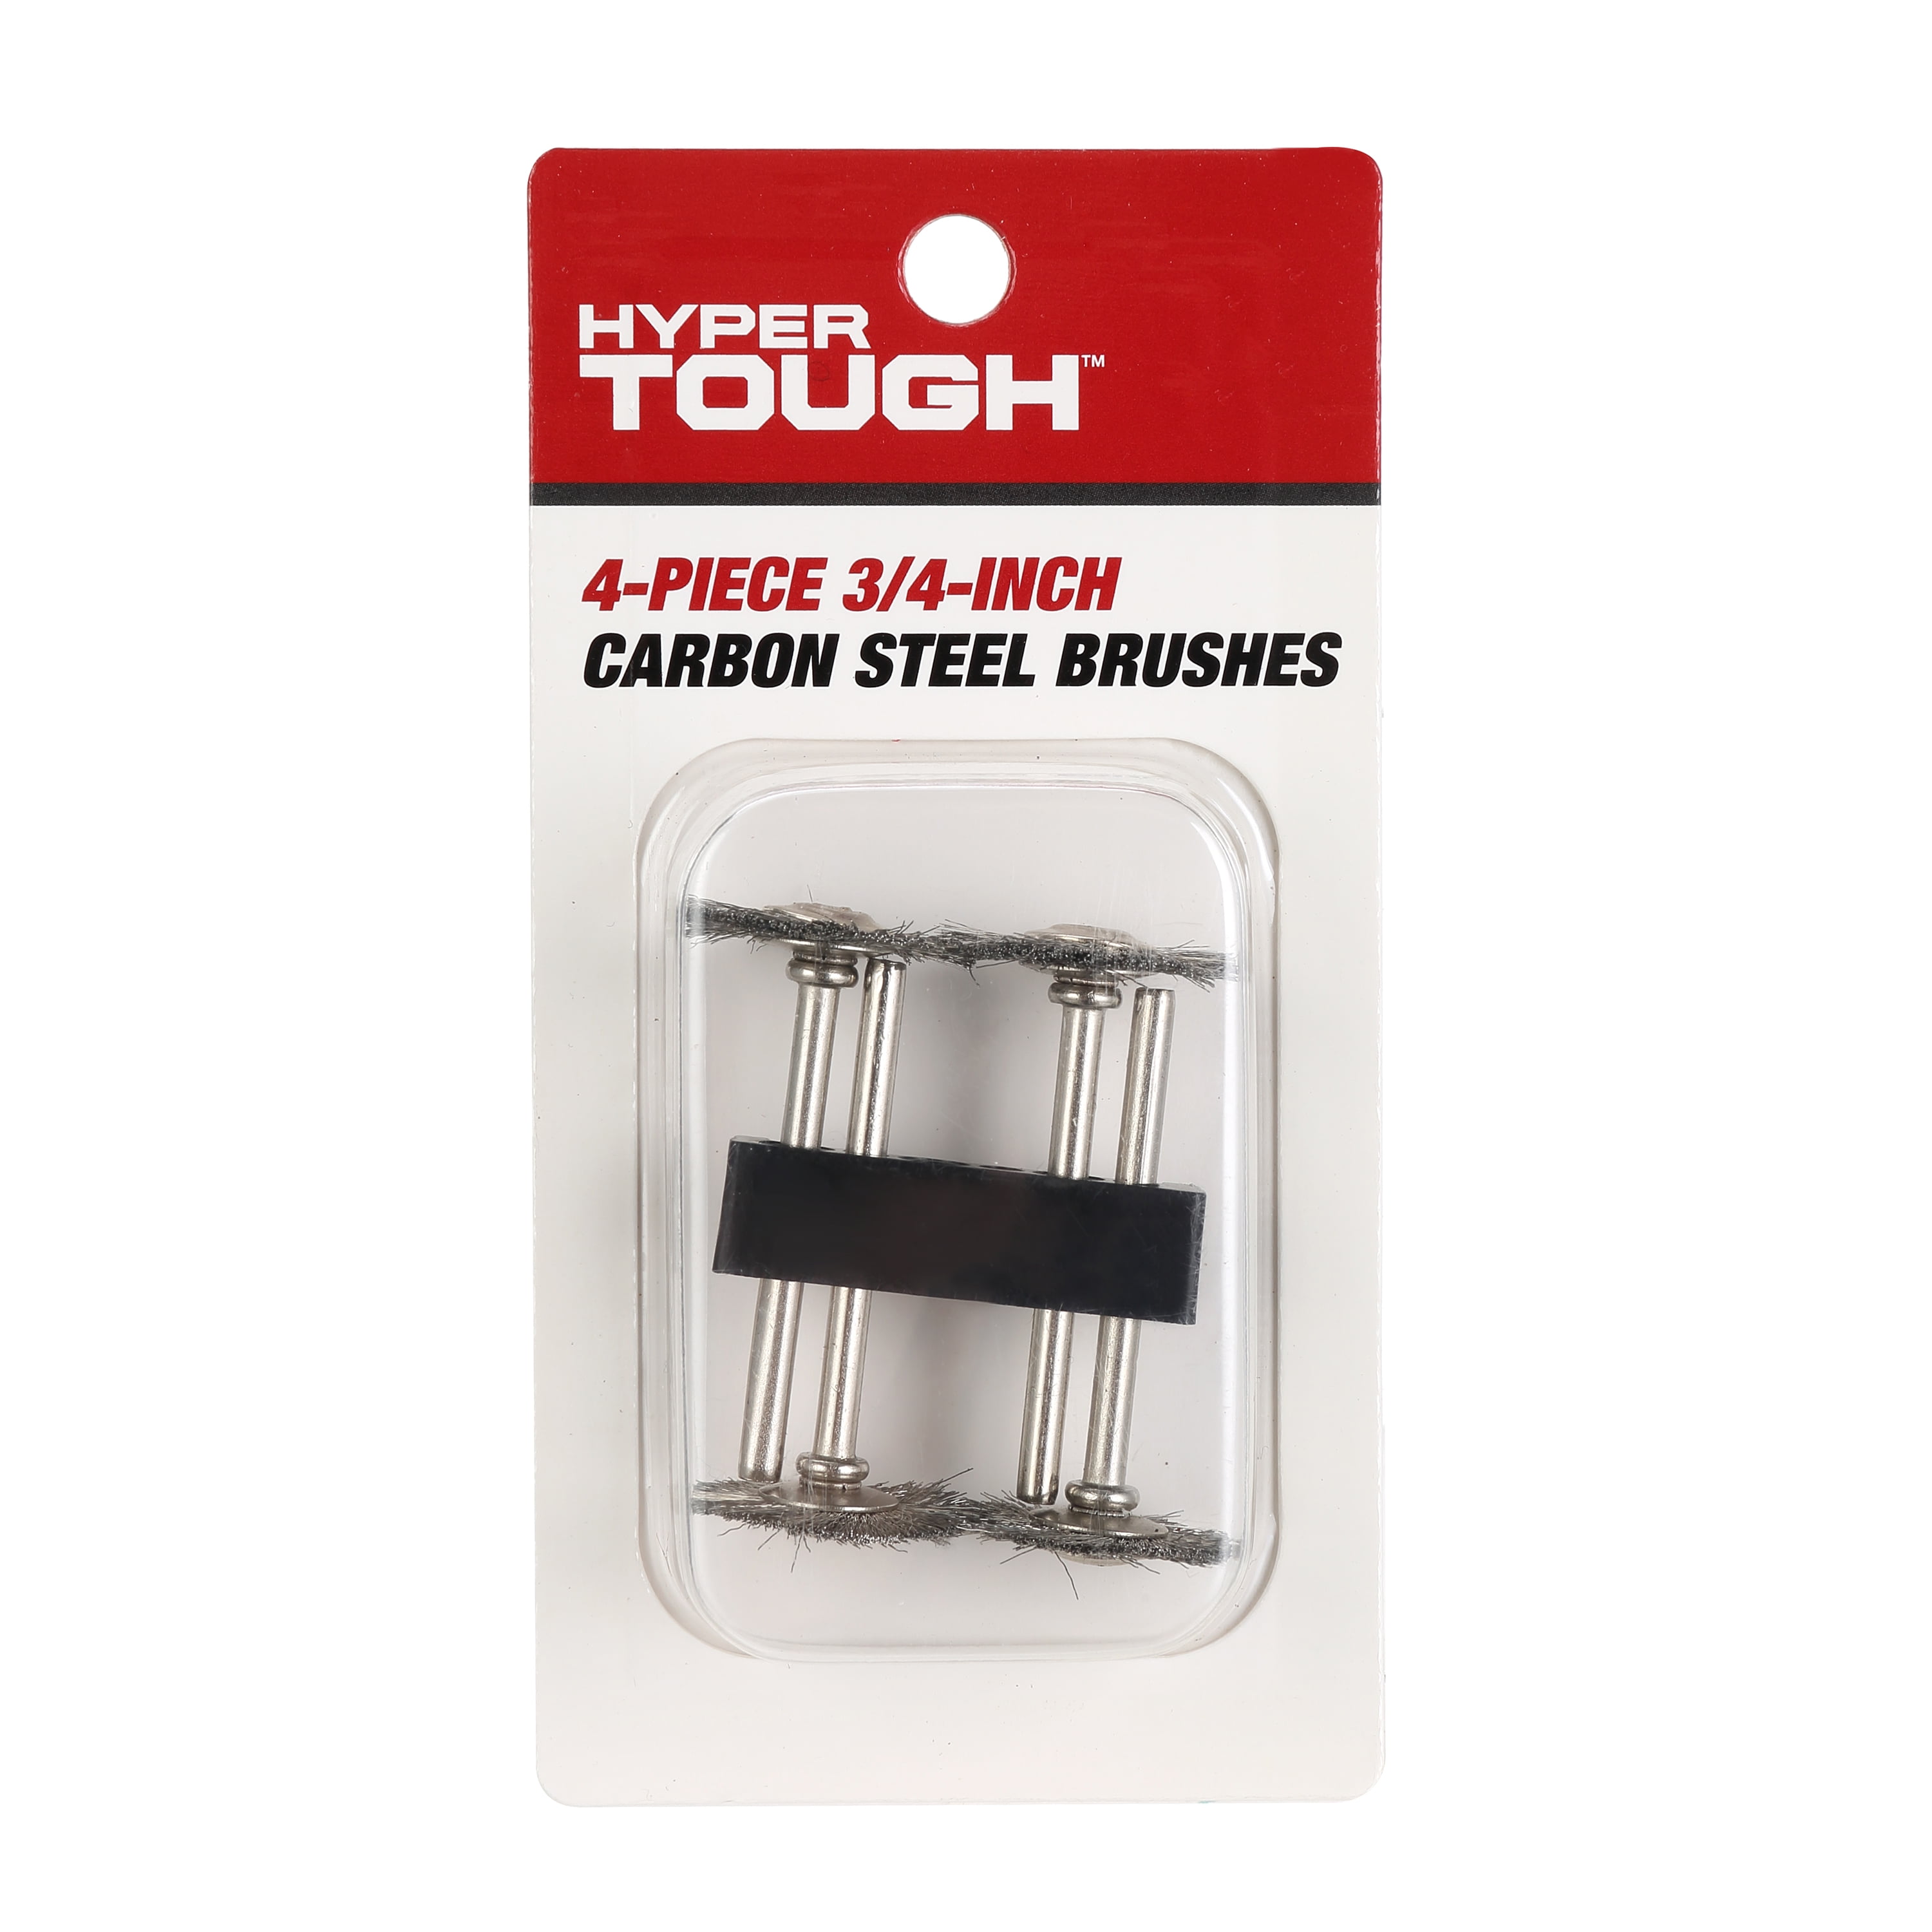 Hyper Tough 4 Piece 3/4 inch Carbon Steel Abrasive Brushes